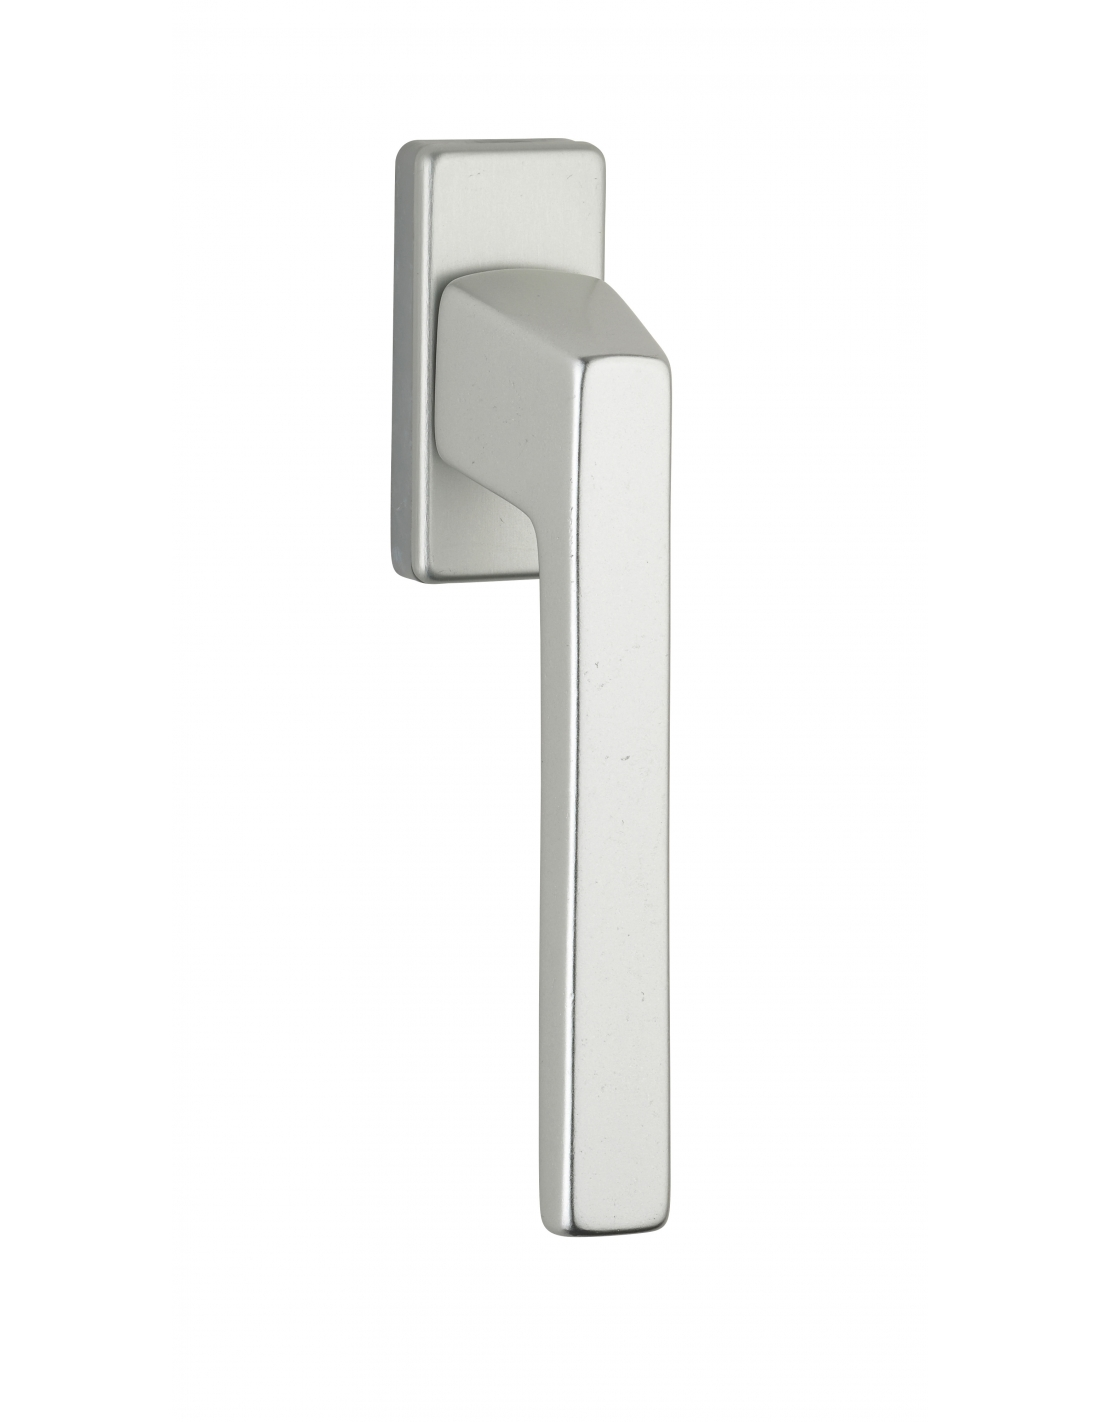 Window handle, Archimedean lever handle with concealed screw, silver